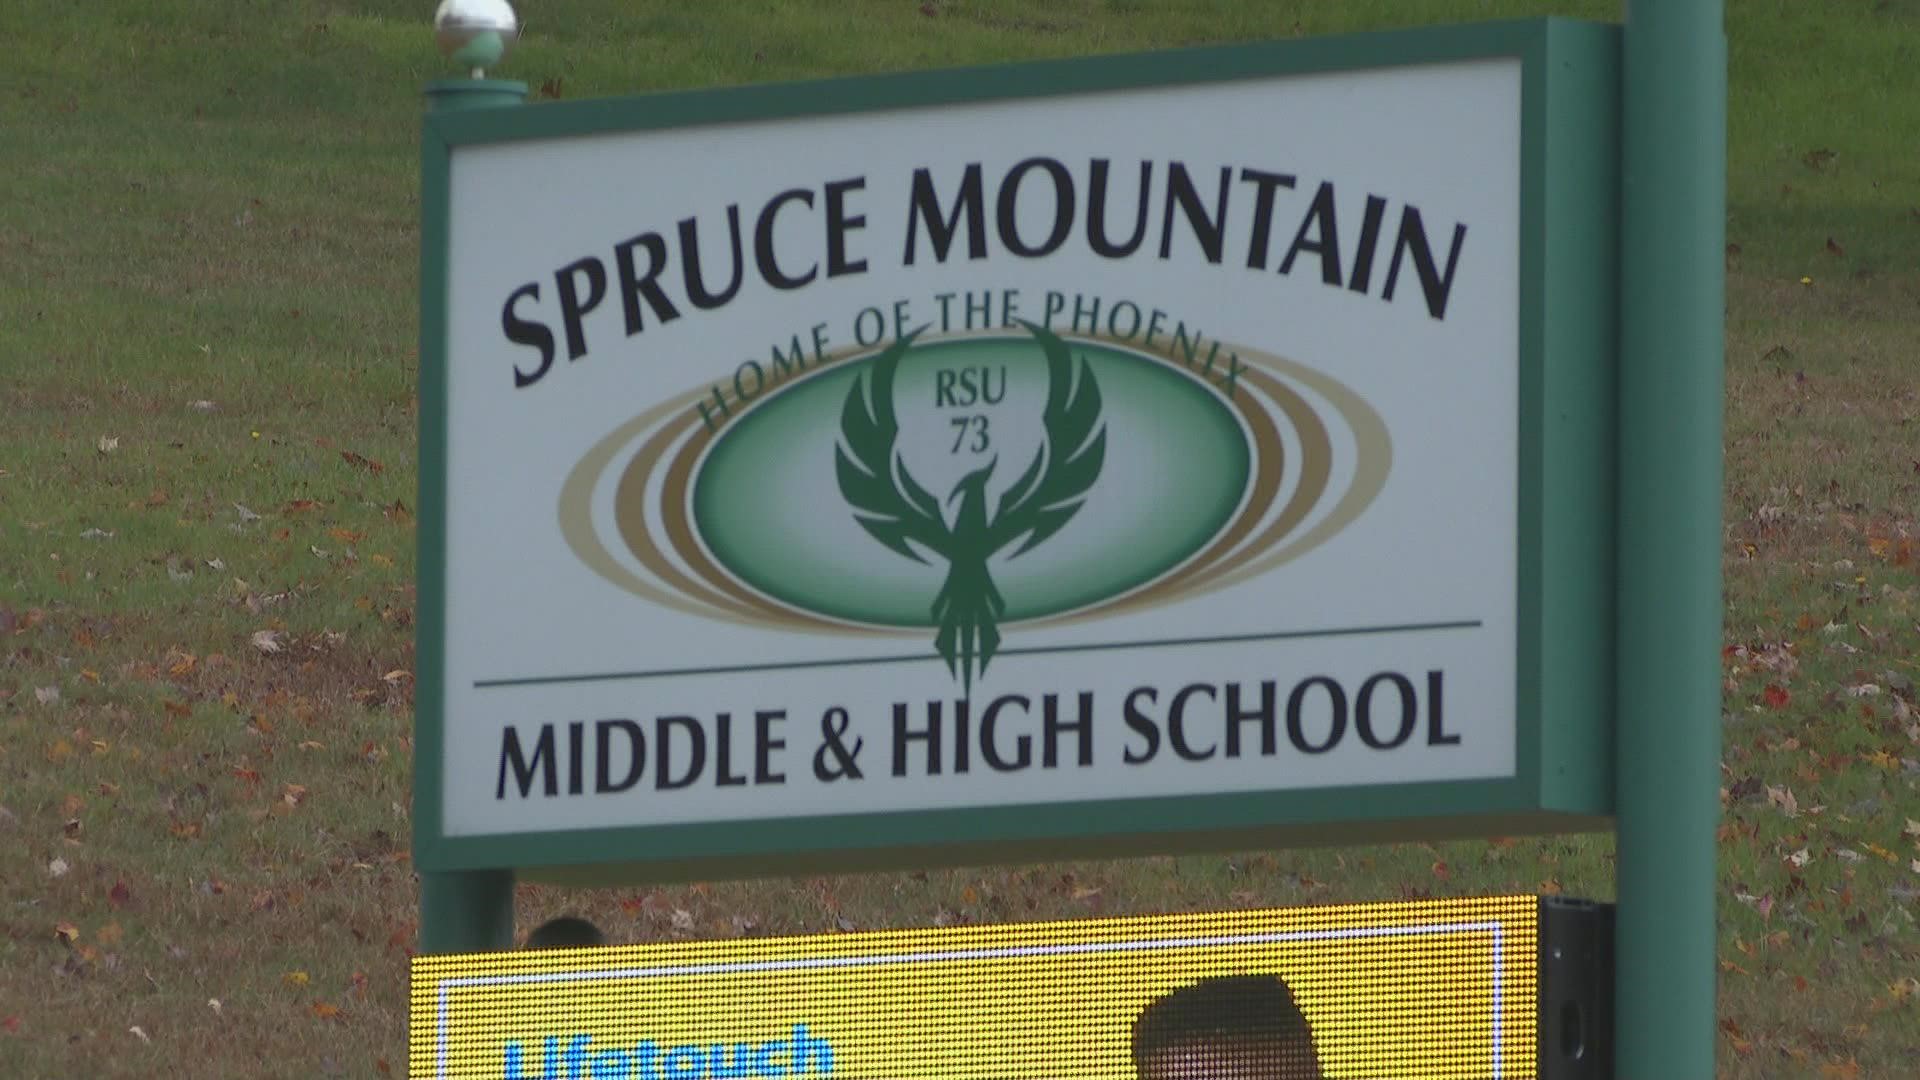 School officials in Jay are investigating an incident regarding a "criminal threat" on a bathroom wall at Spruce Mountain High School on Oct. 6.